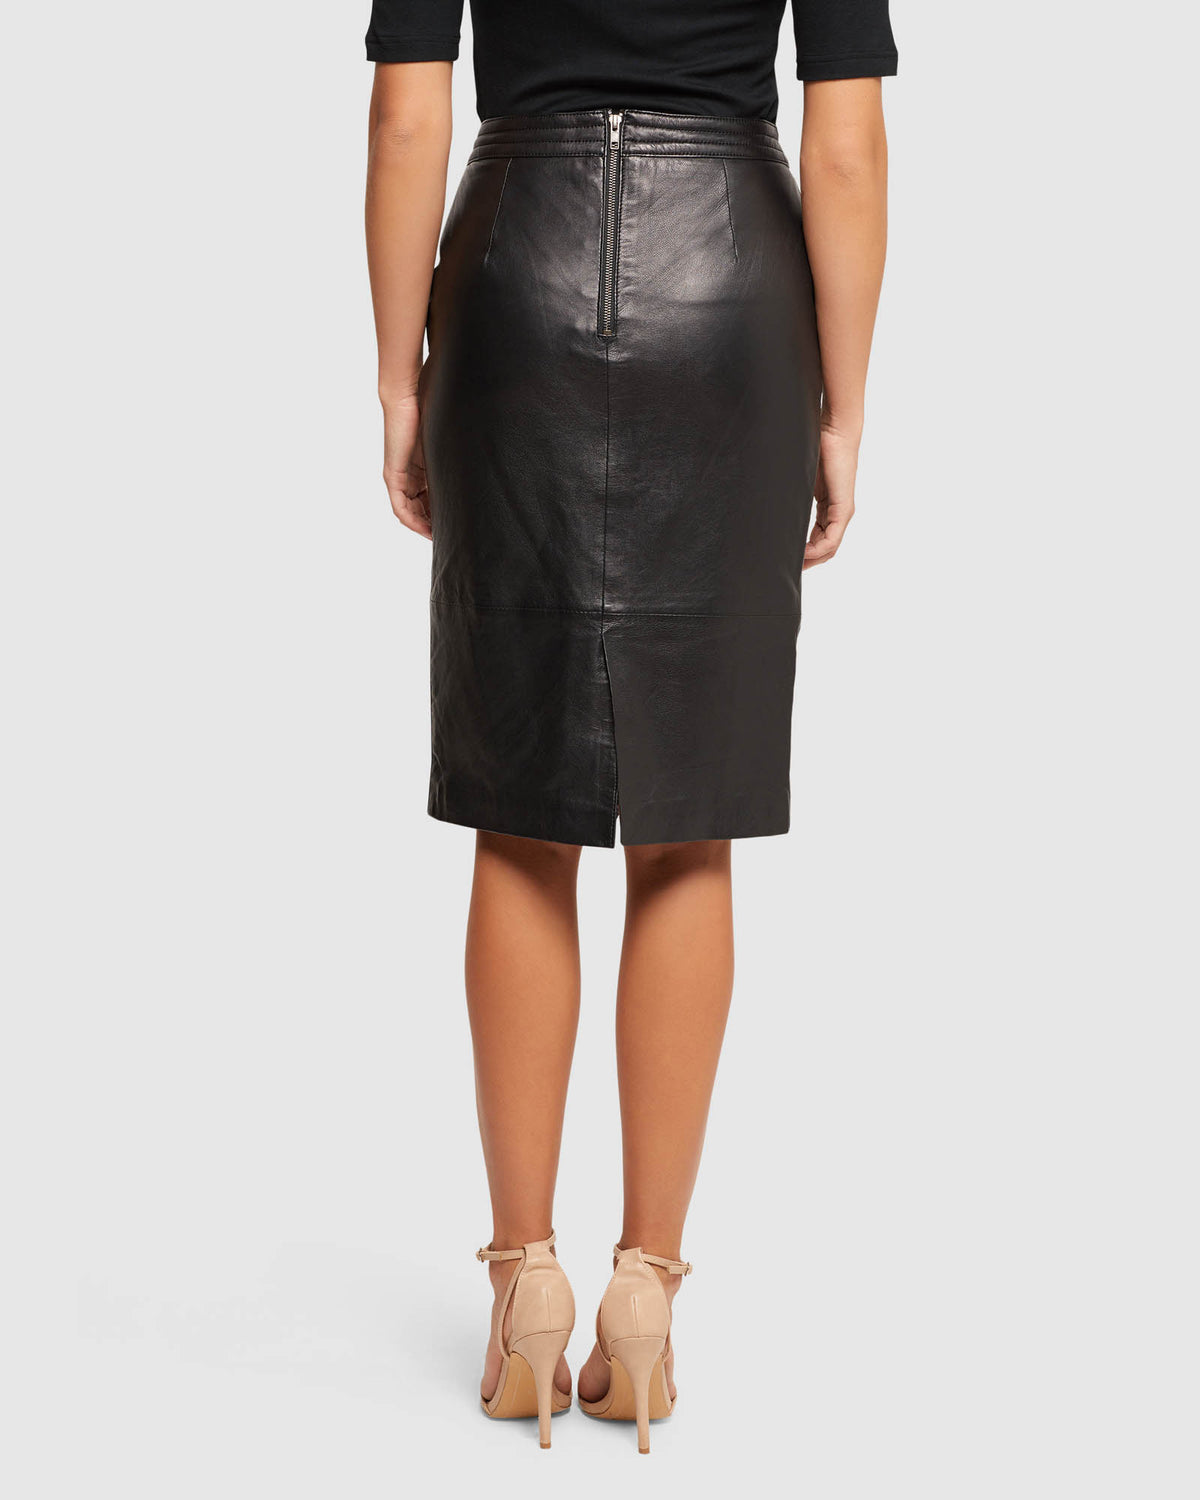 SCOUT LEATHER SKIRT WOMENS SKIRTS